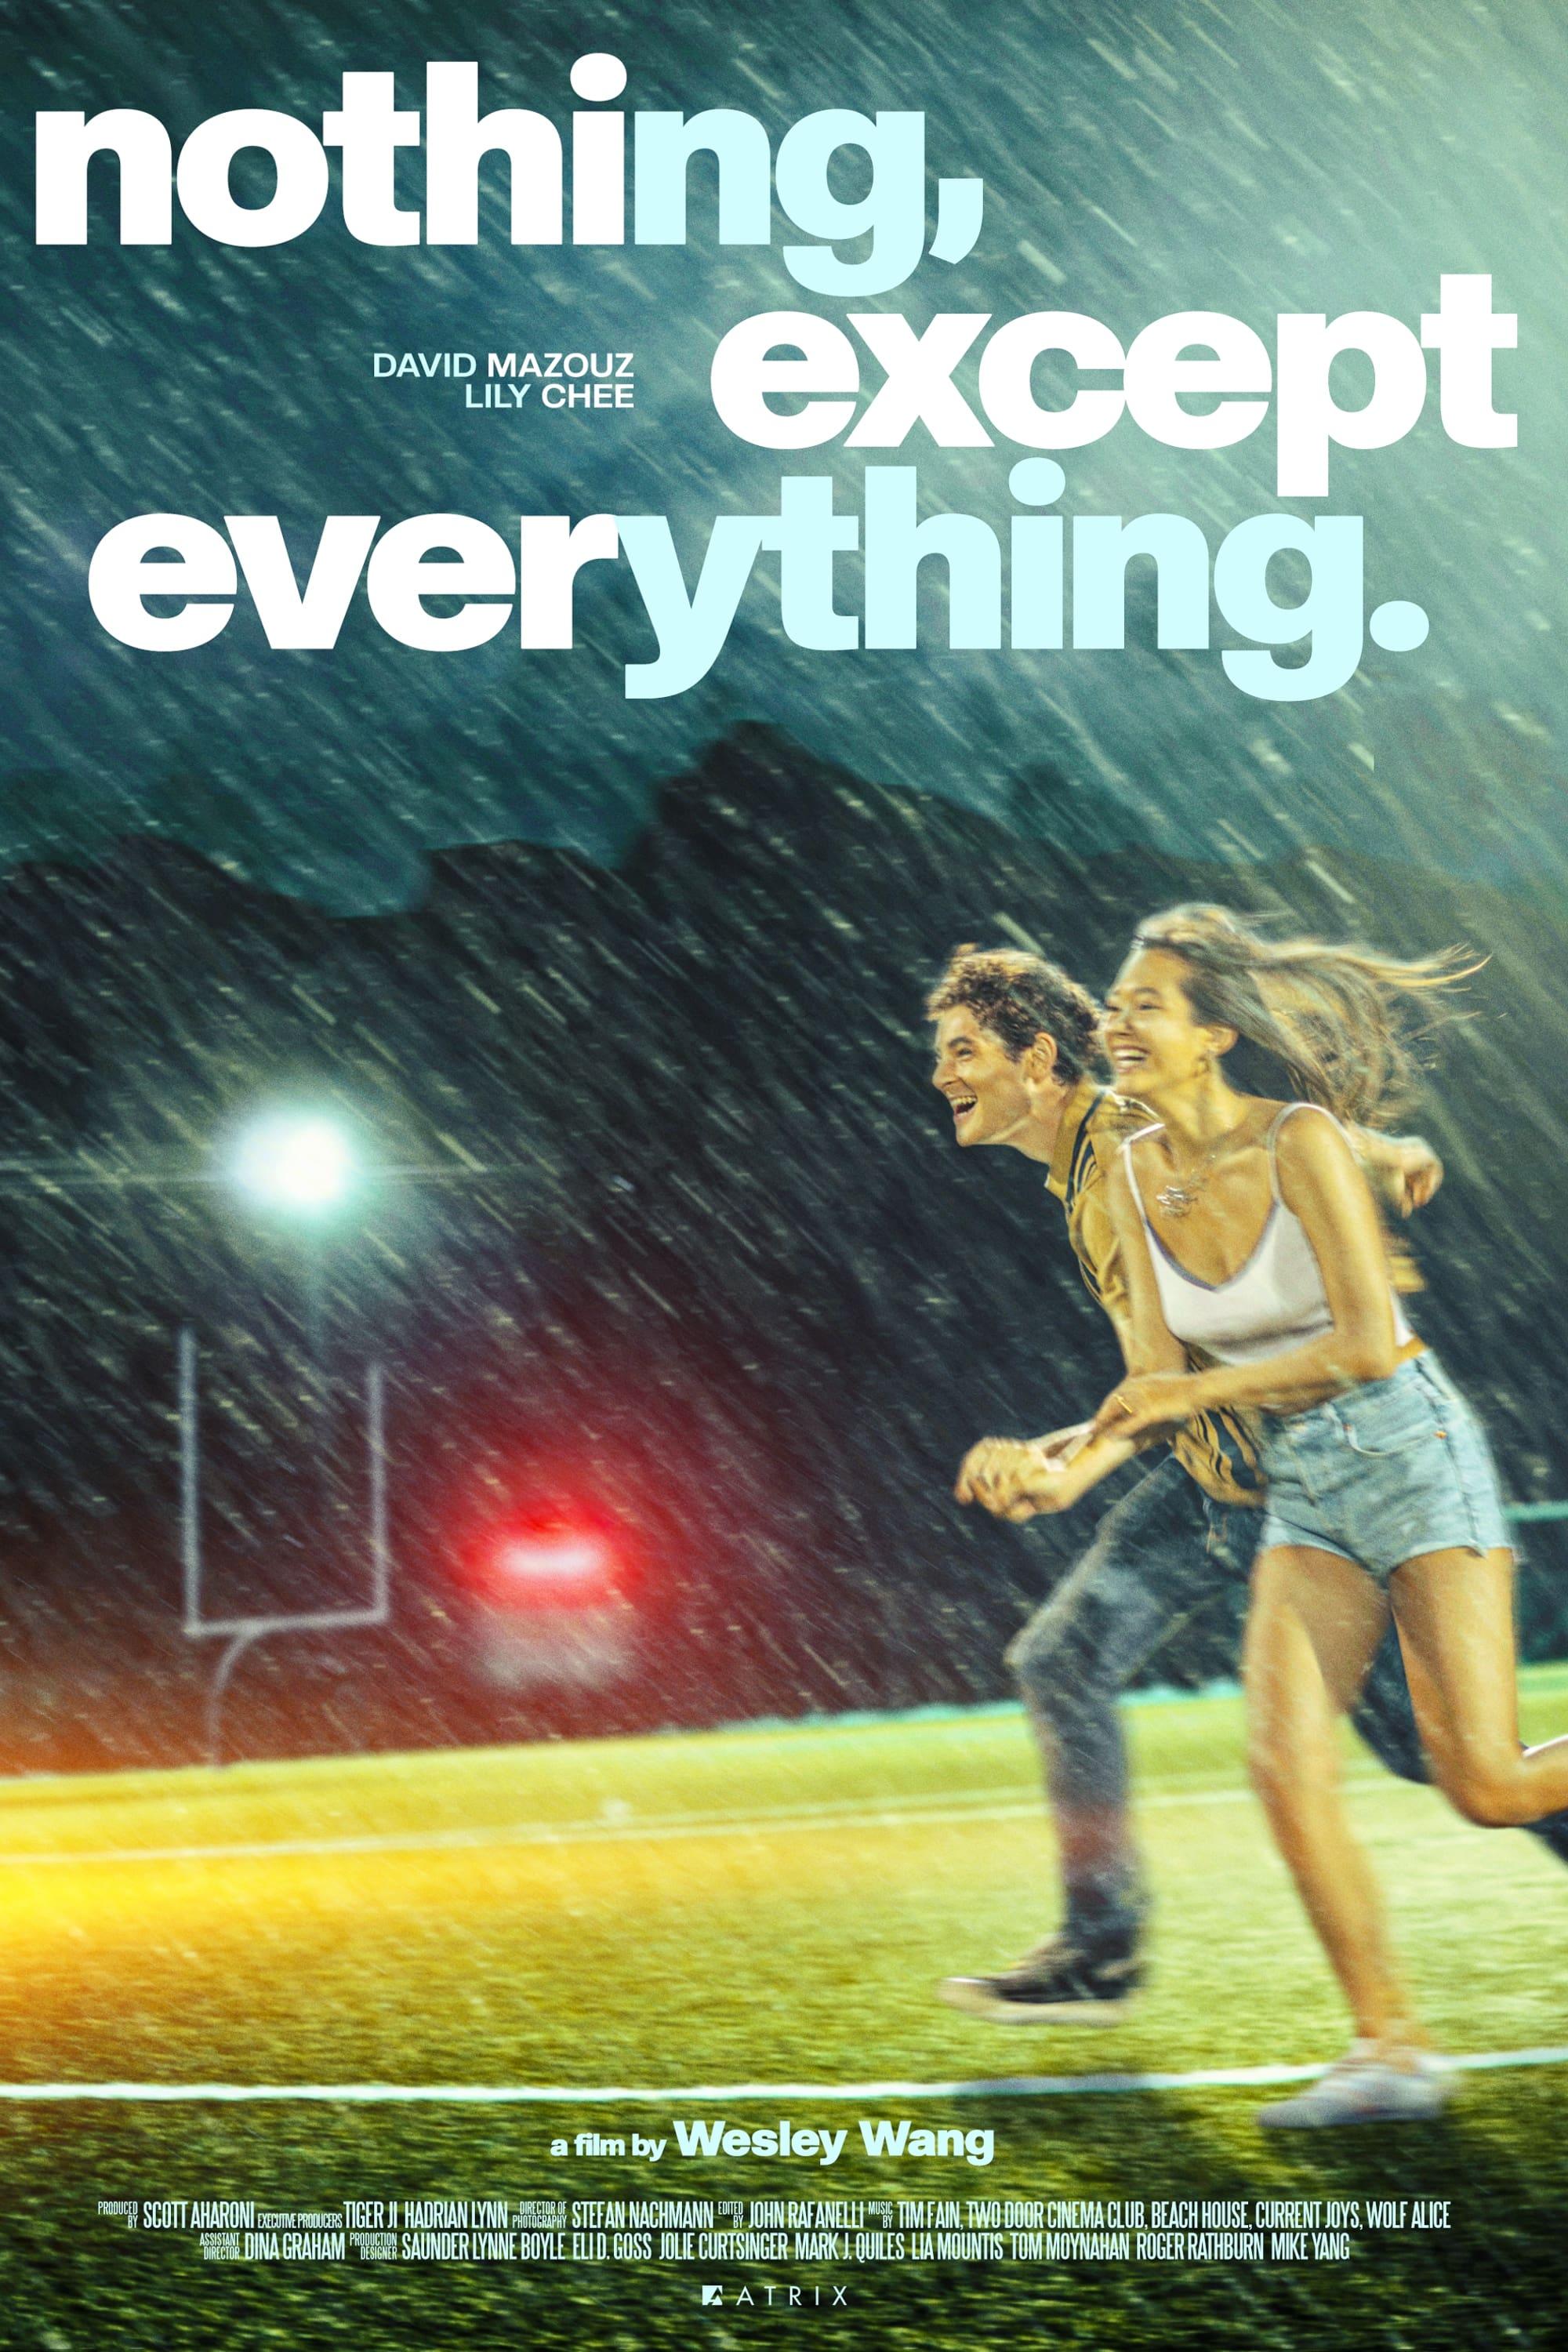 nothing, except everything. poster